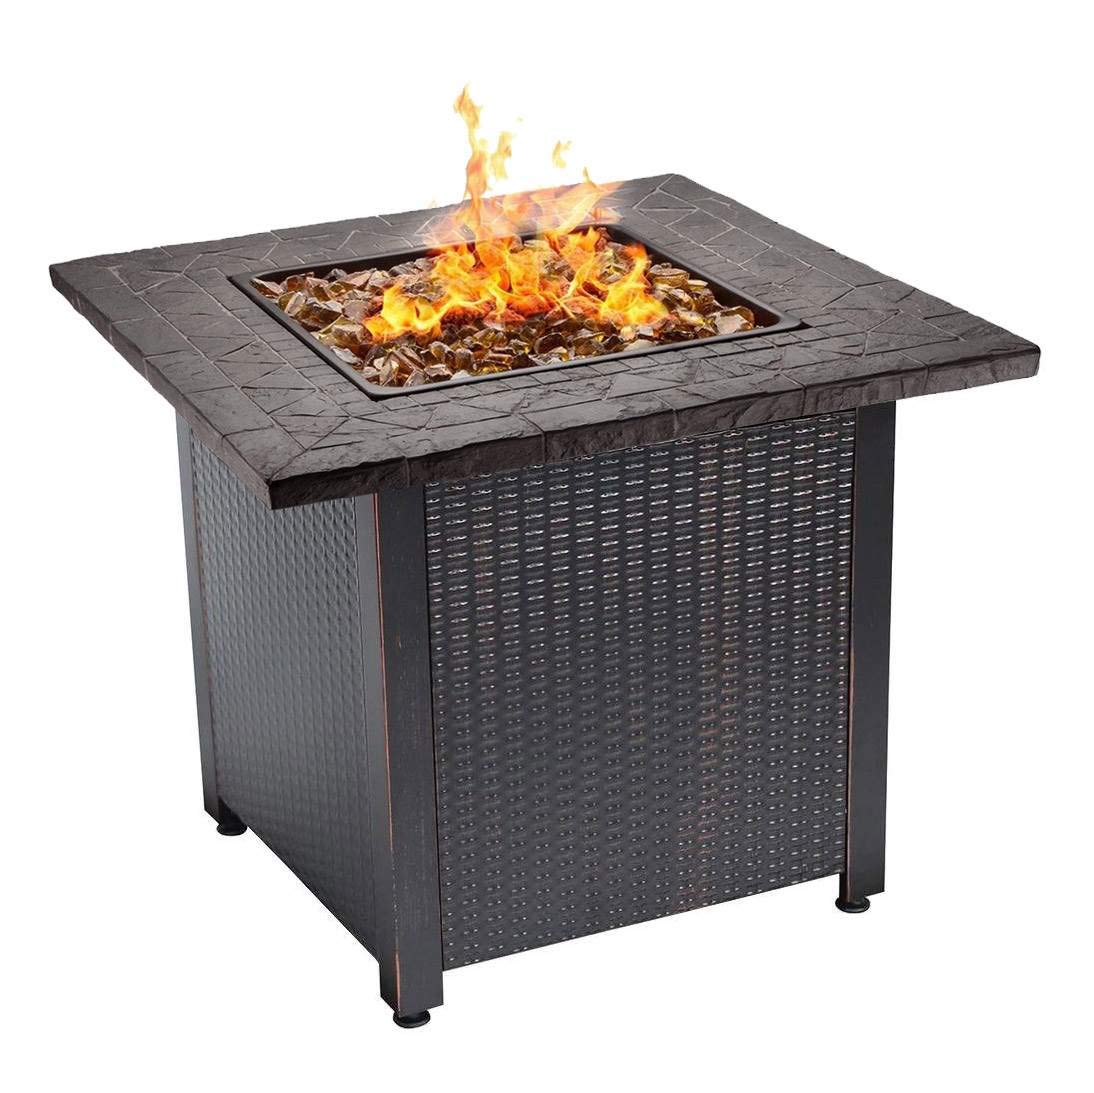 Propane Tank for Gas Fireplace New Endless Summer Gad1401g Lp Gas Outdoor Fire Table Multicolor